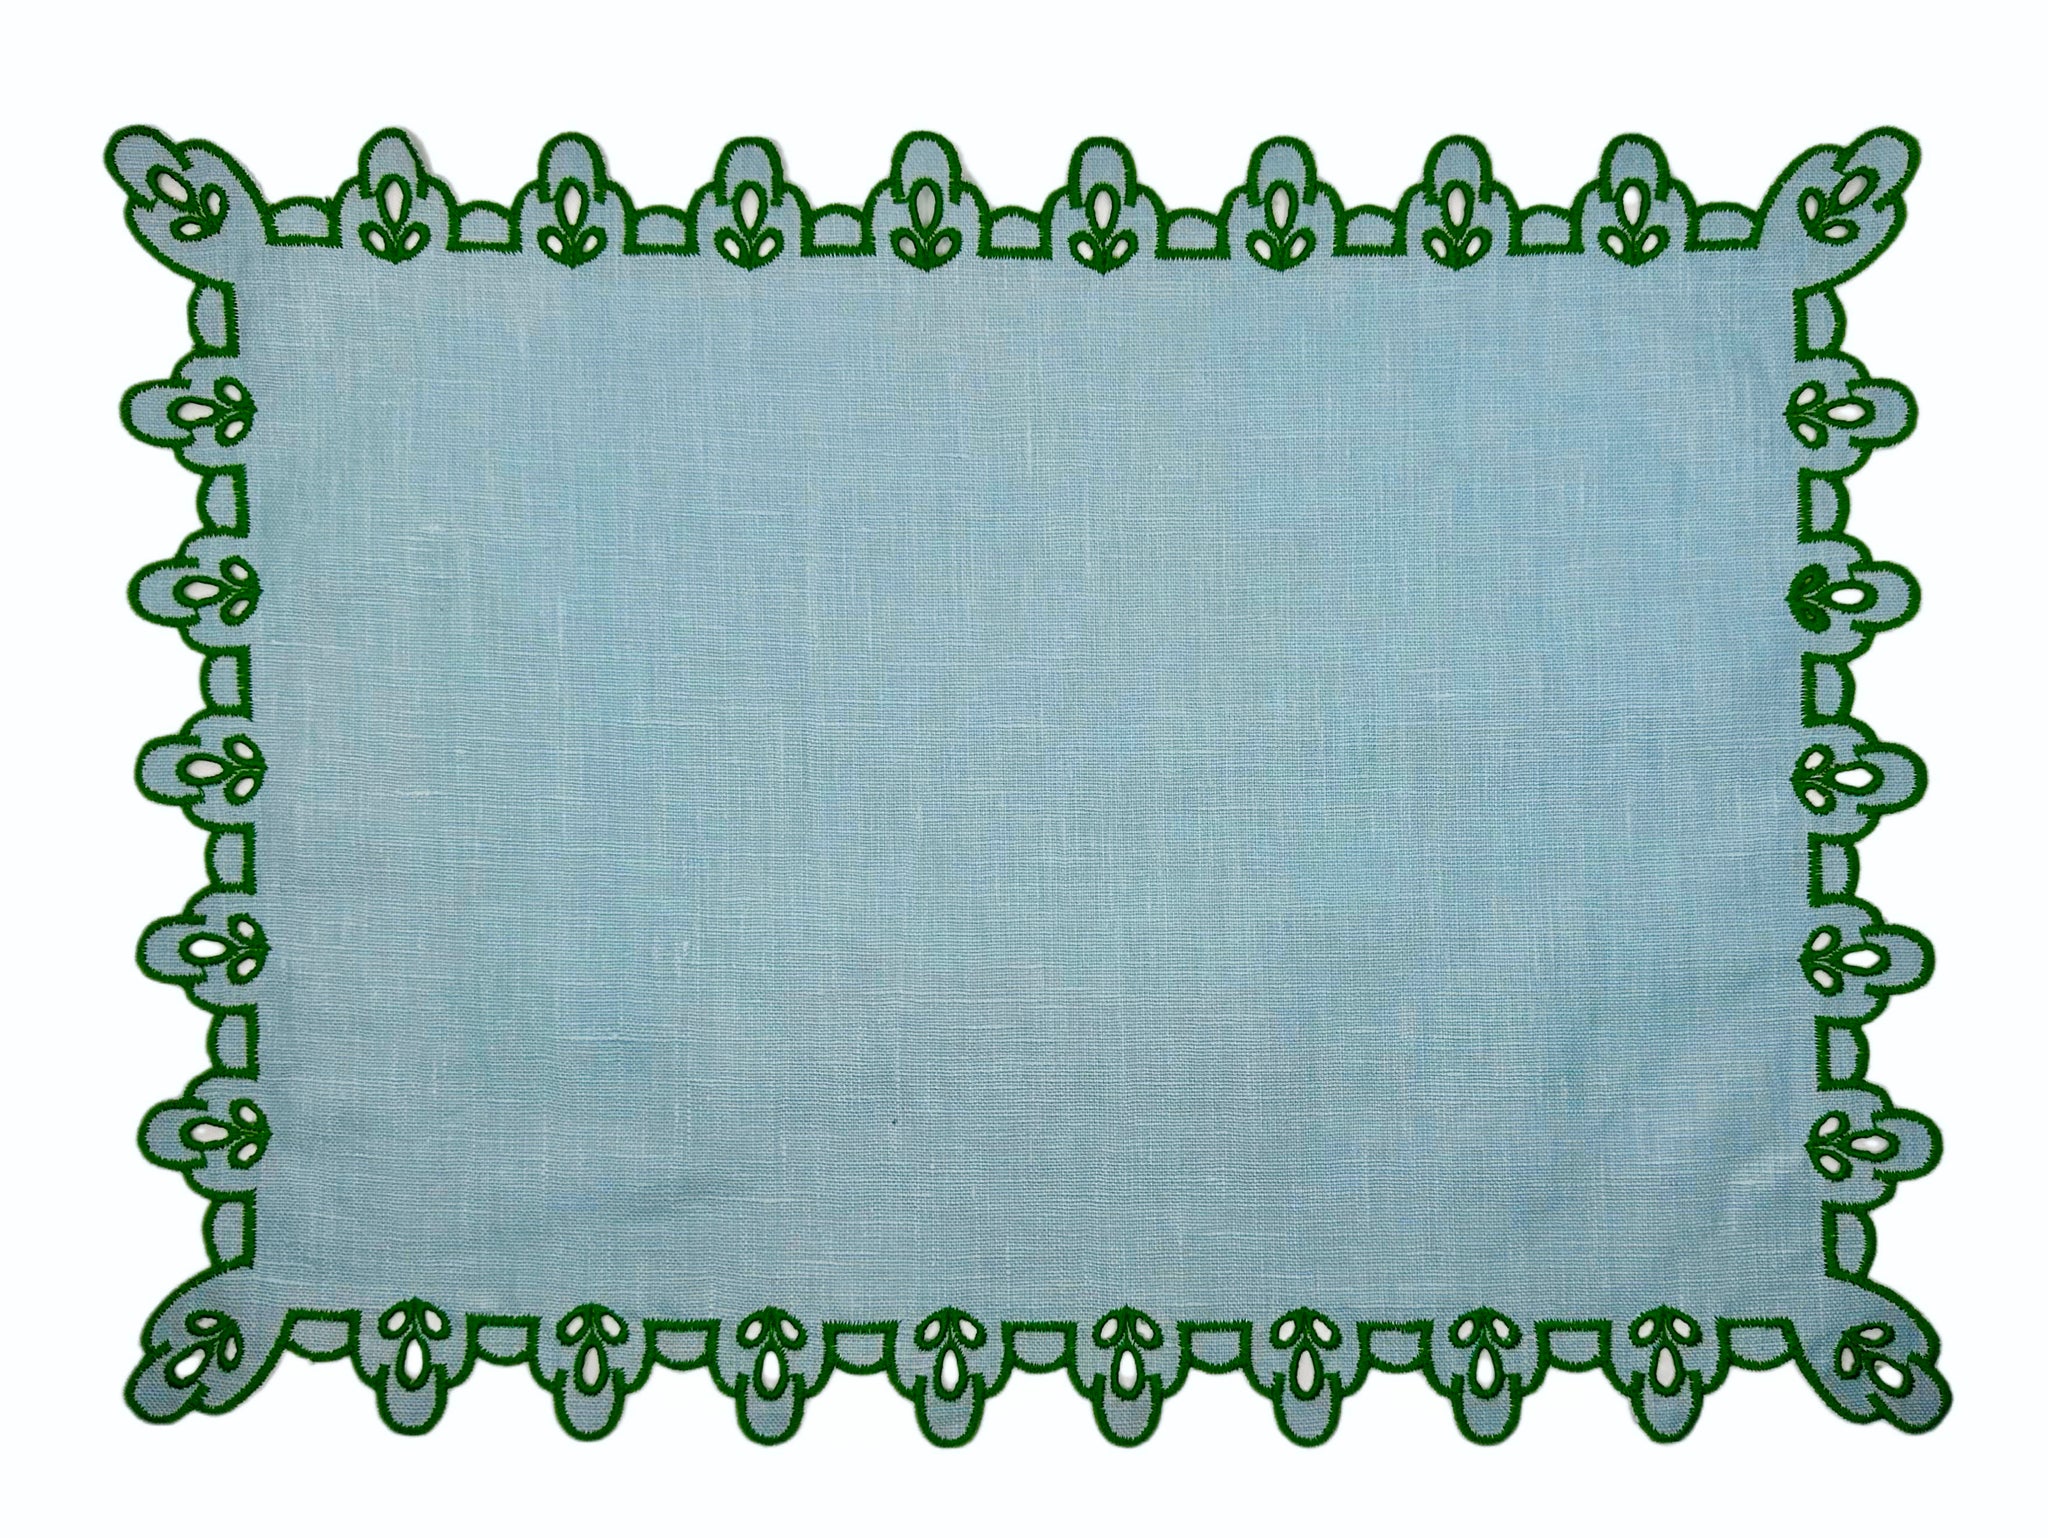 Amalfi Coated Cotton Placemat in Azzurro + Verde